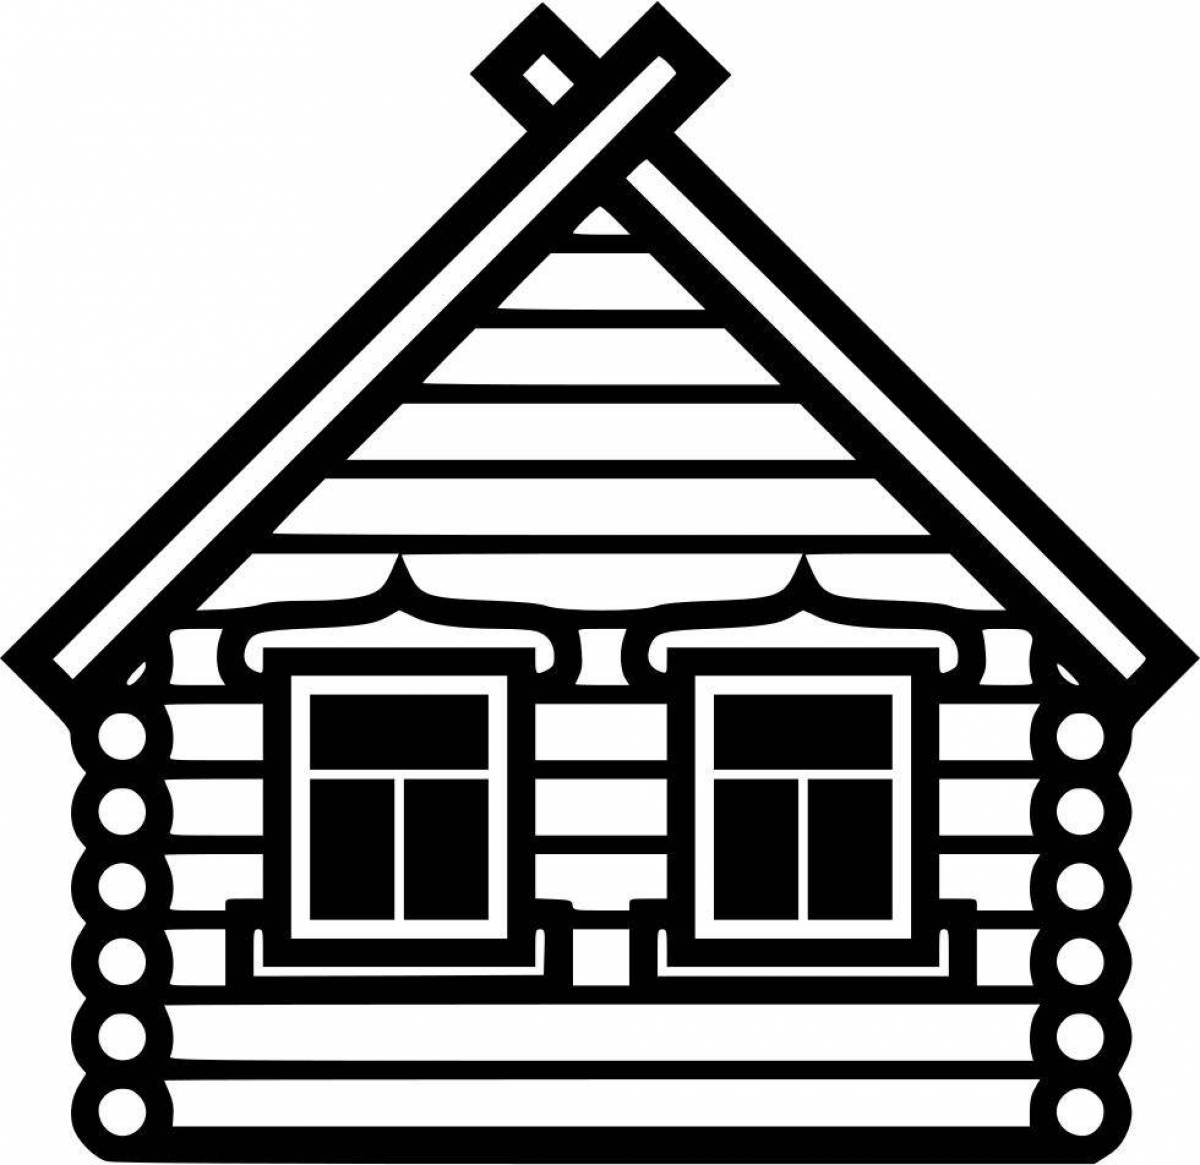 Coloring page charming wooden hut